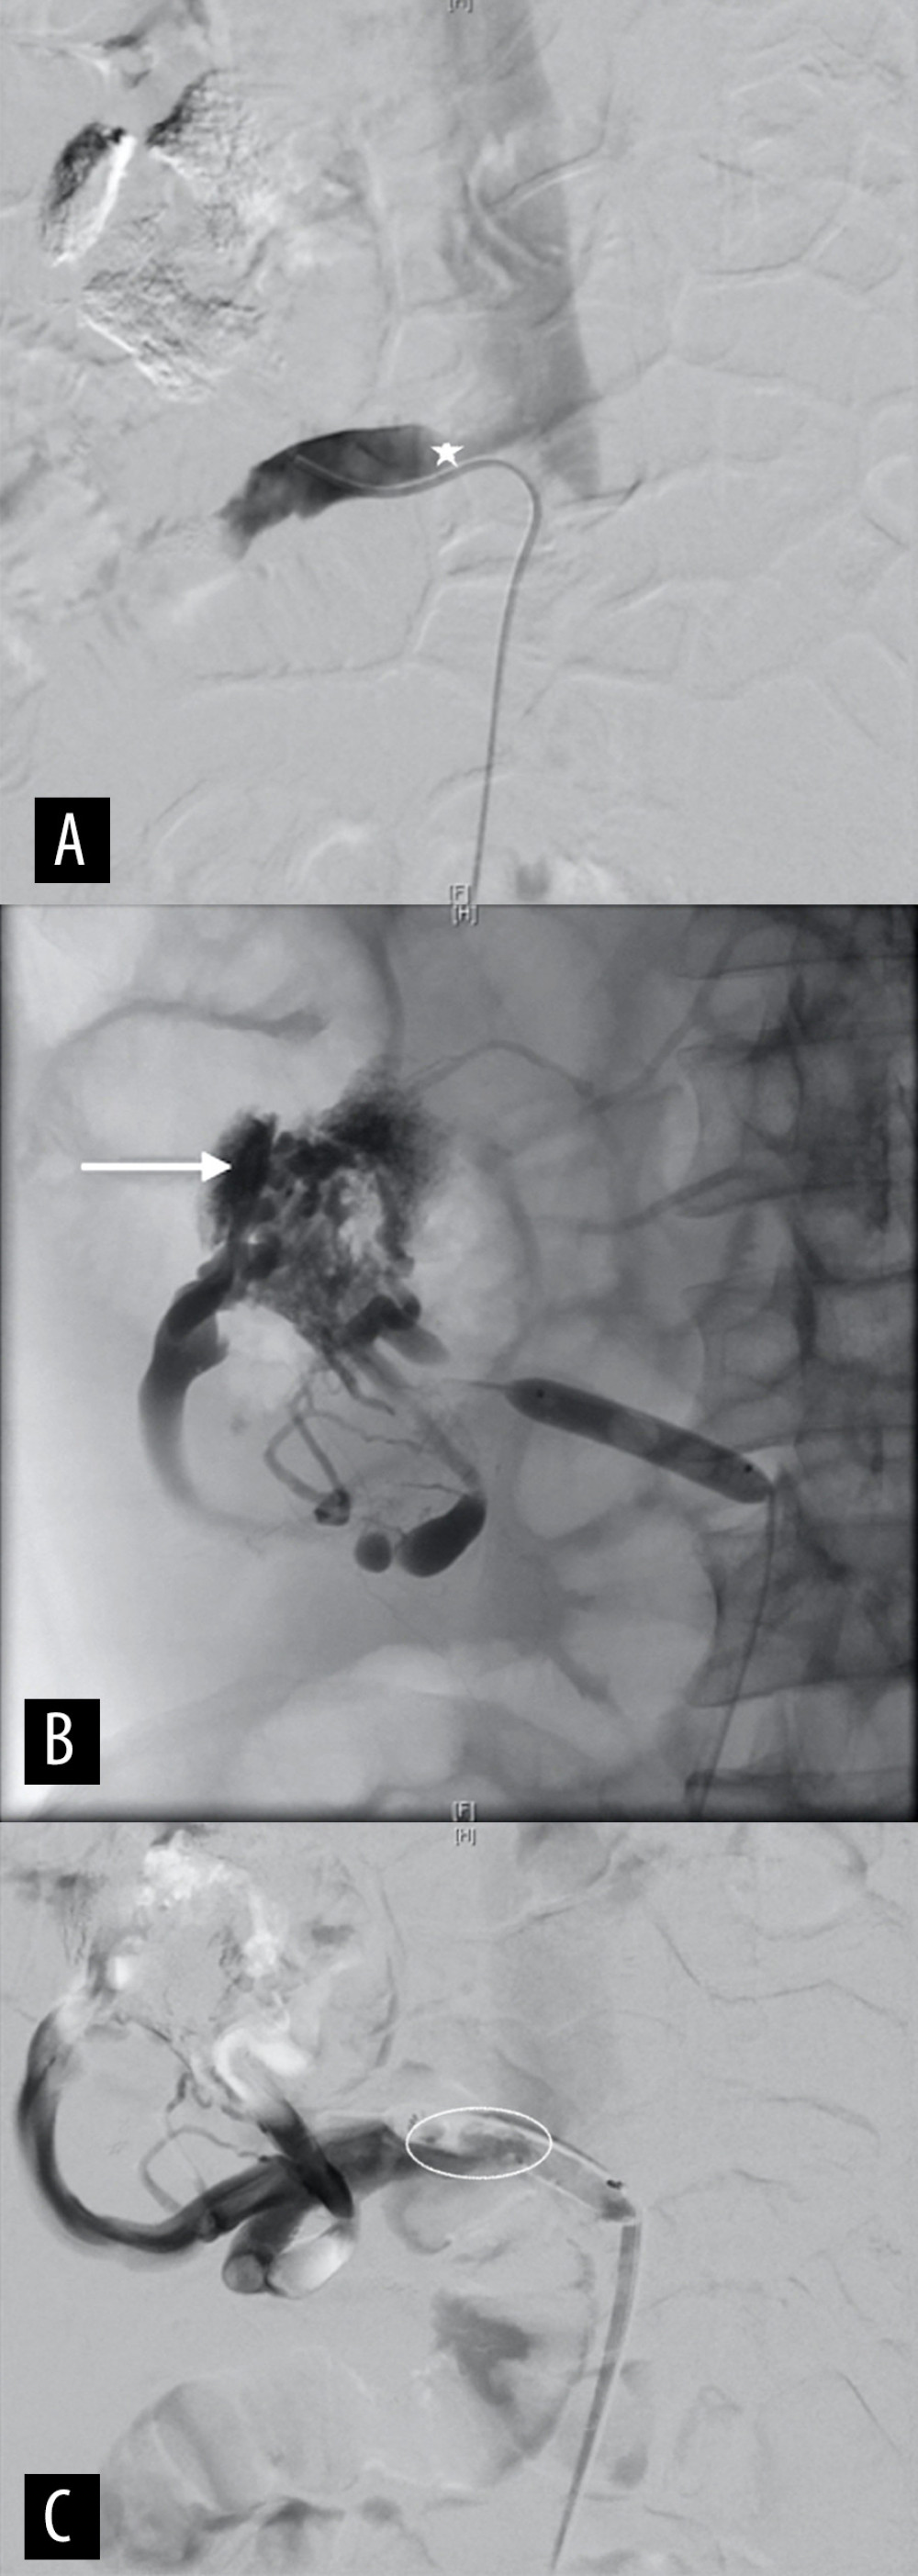 (A) Angiographic dilatation of the portosystemic anastomosis of vena cava inferior with a balloon after pancreas-kidney transplantation. Image of the stenosis (asterisk). (B) Angiographic dilatation of the portosystemic anastomosis of vena cava inferior with a balloon after pancreas-kidney transplantation. Image of the jejunal varices (arrow). (C) Angiographic dilatation of the portosystemic anastomosis of vena cava inferior with a balloon after pancreas-kidney transplantation. Dilatation of the stenosis with a balloon (ellipse).